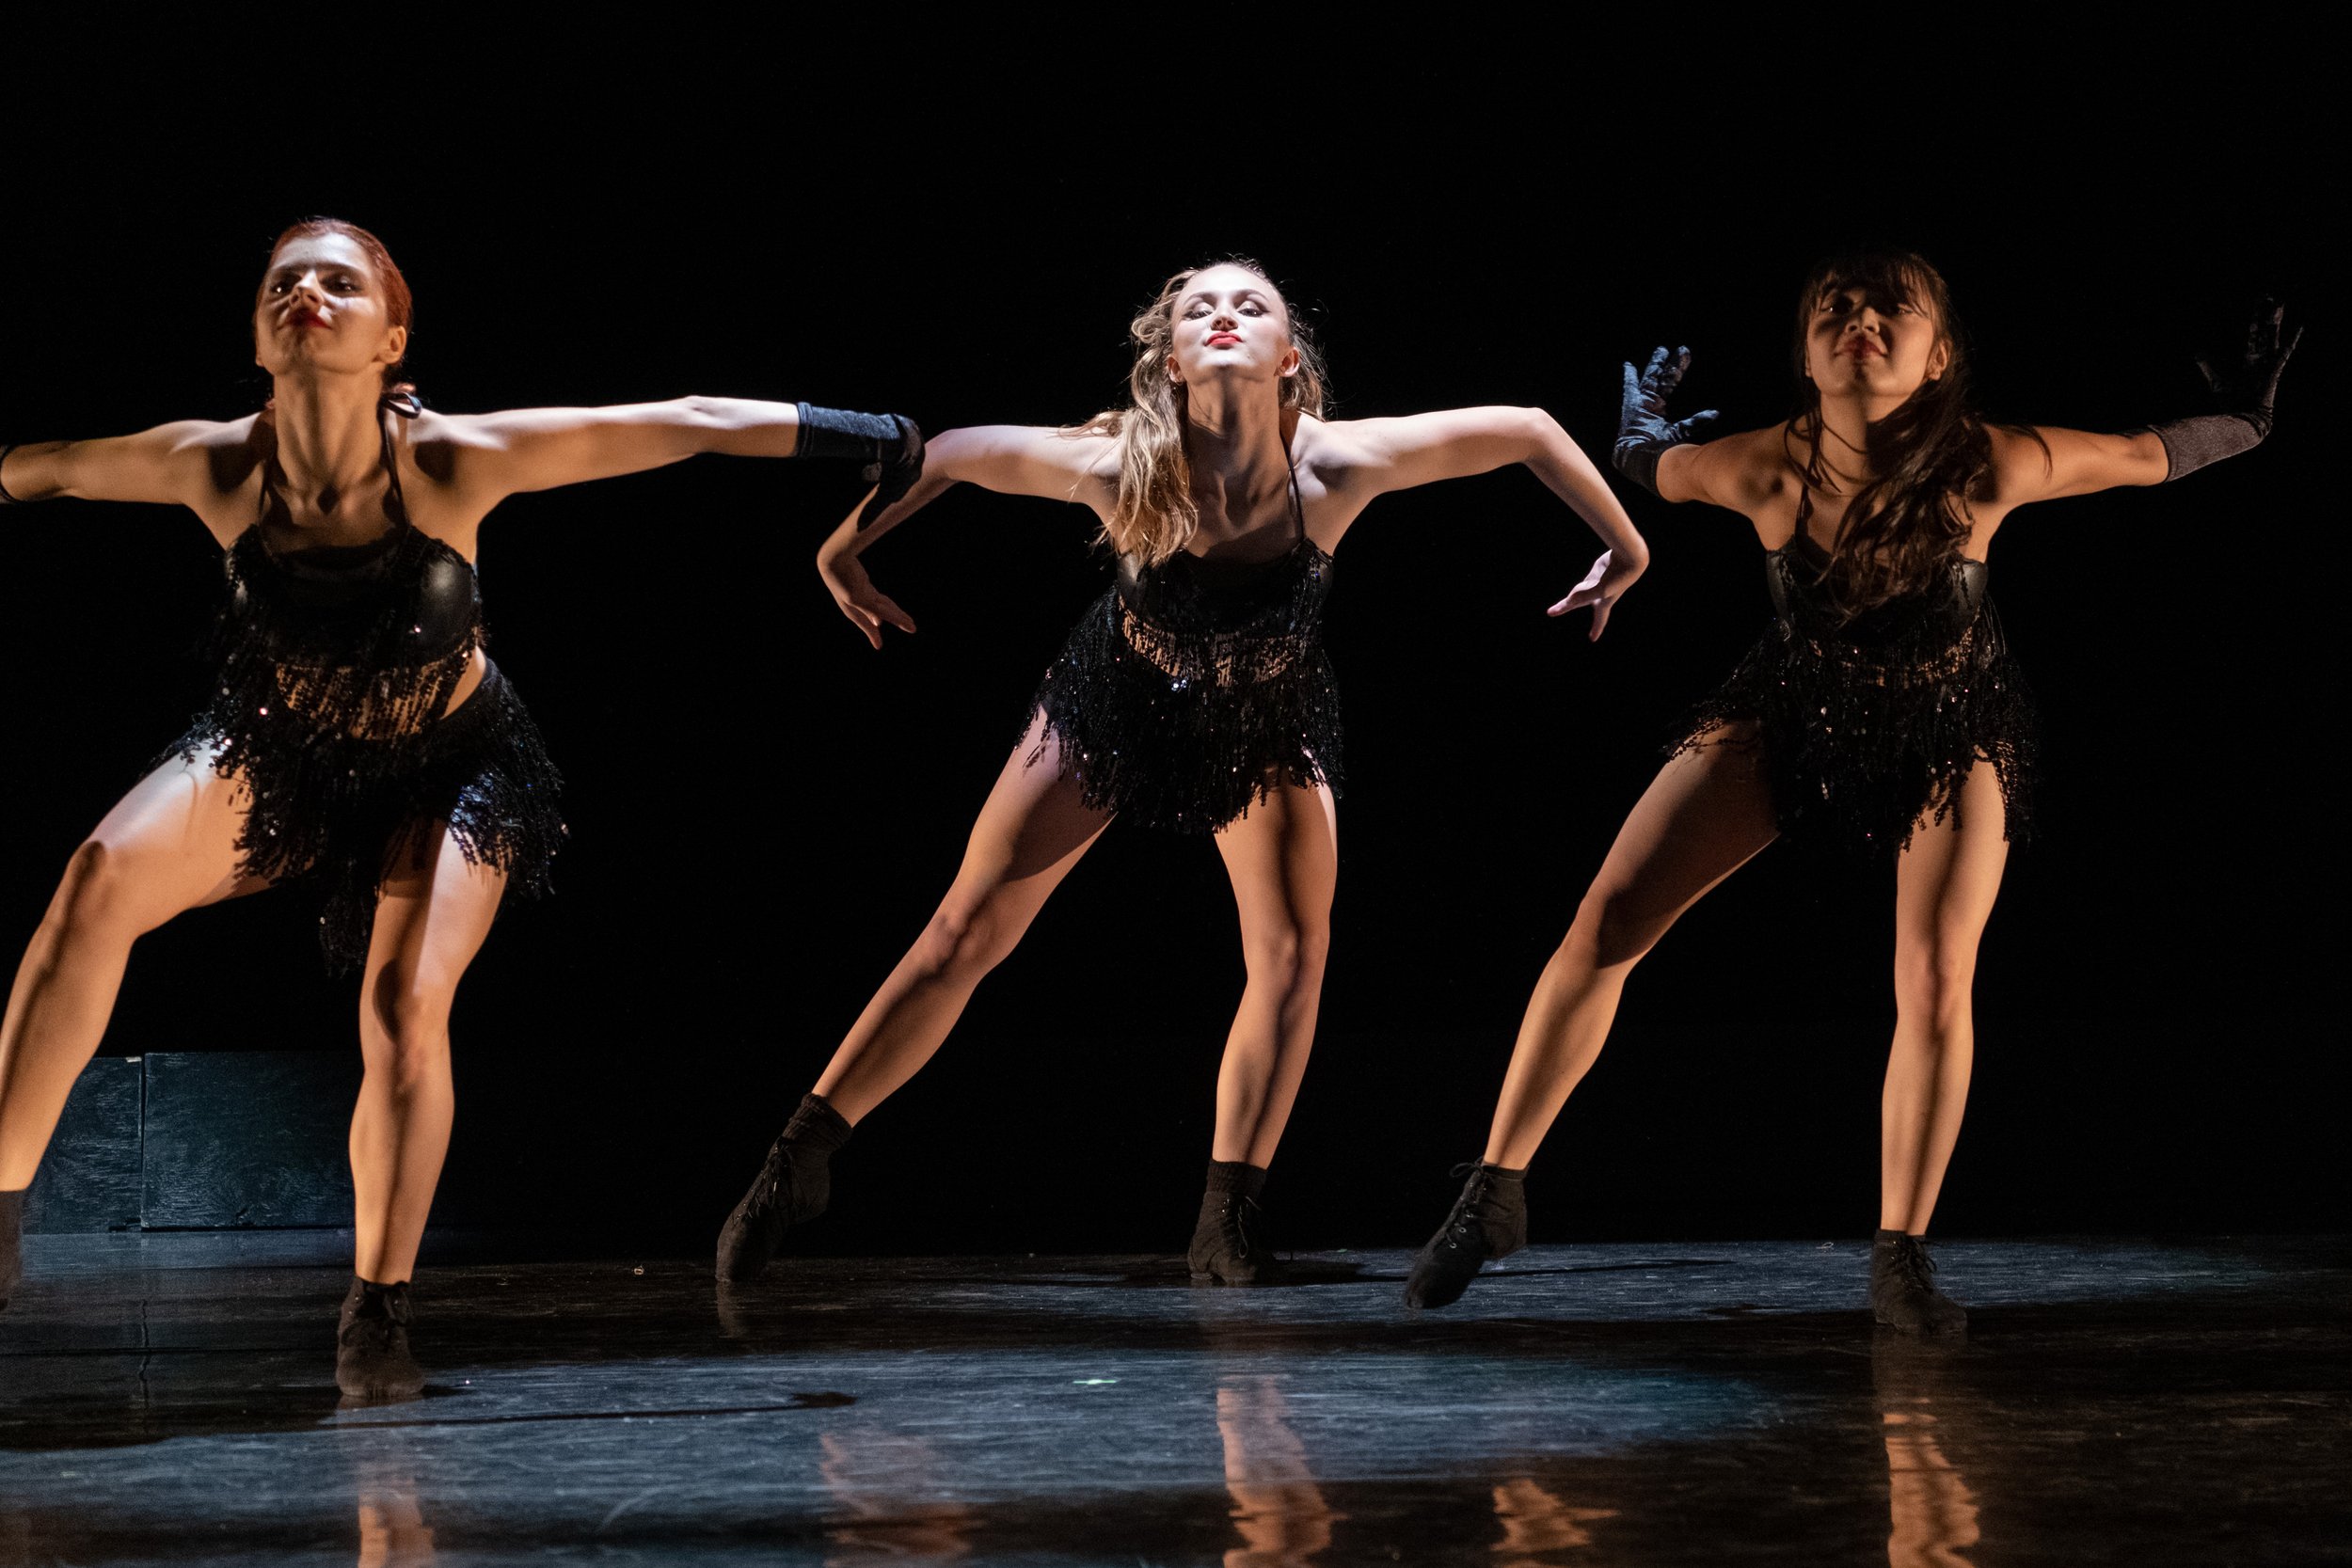  Santa Monica College students (L to R) Angelina Roychenko, Zoe Miller and Heather Ongpauco perform "Ladies First", a Jazz Funk choreography at the dress rehearsal for Global Motion on stage at BroadStage in Santa Monica, Calif. on Wednesday, Nov. 15